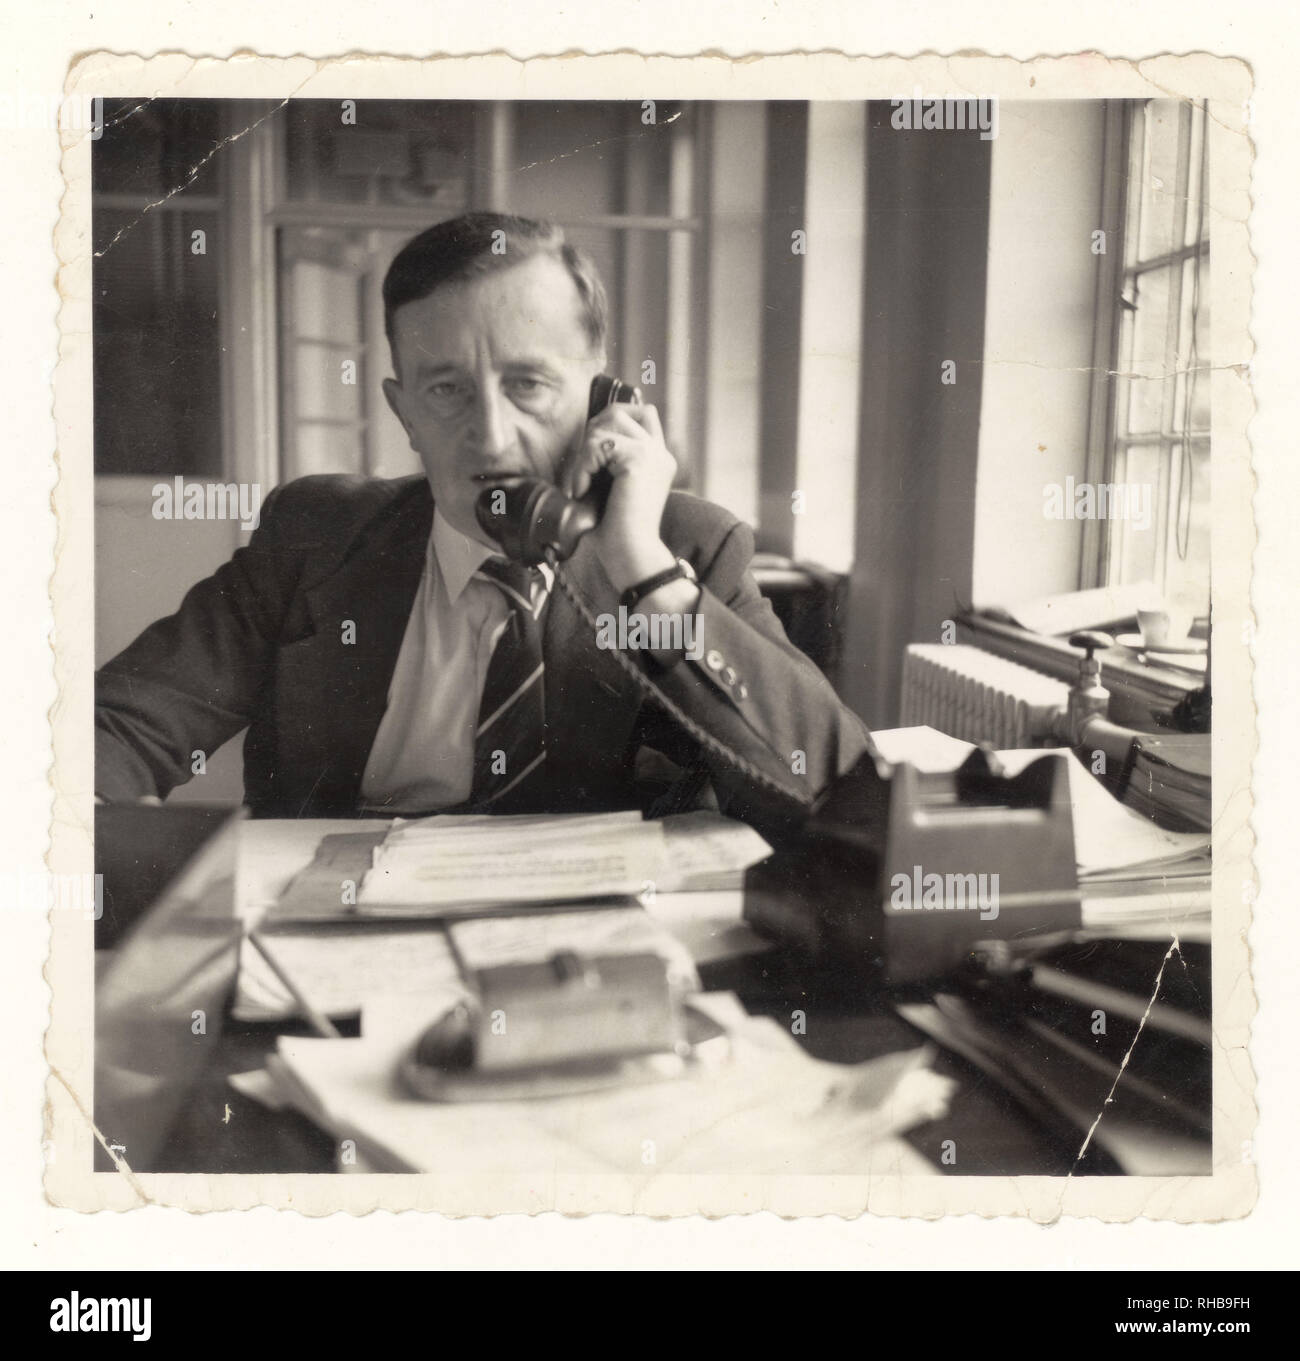 Photo of stressed unhappy older middle aged man, management, manager, managing / working in office using telephone circa 1950's, U.K. Stock Photo